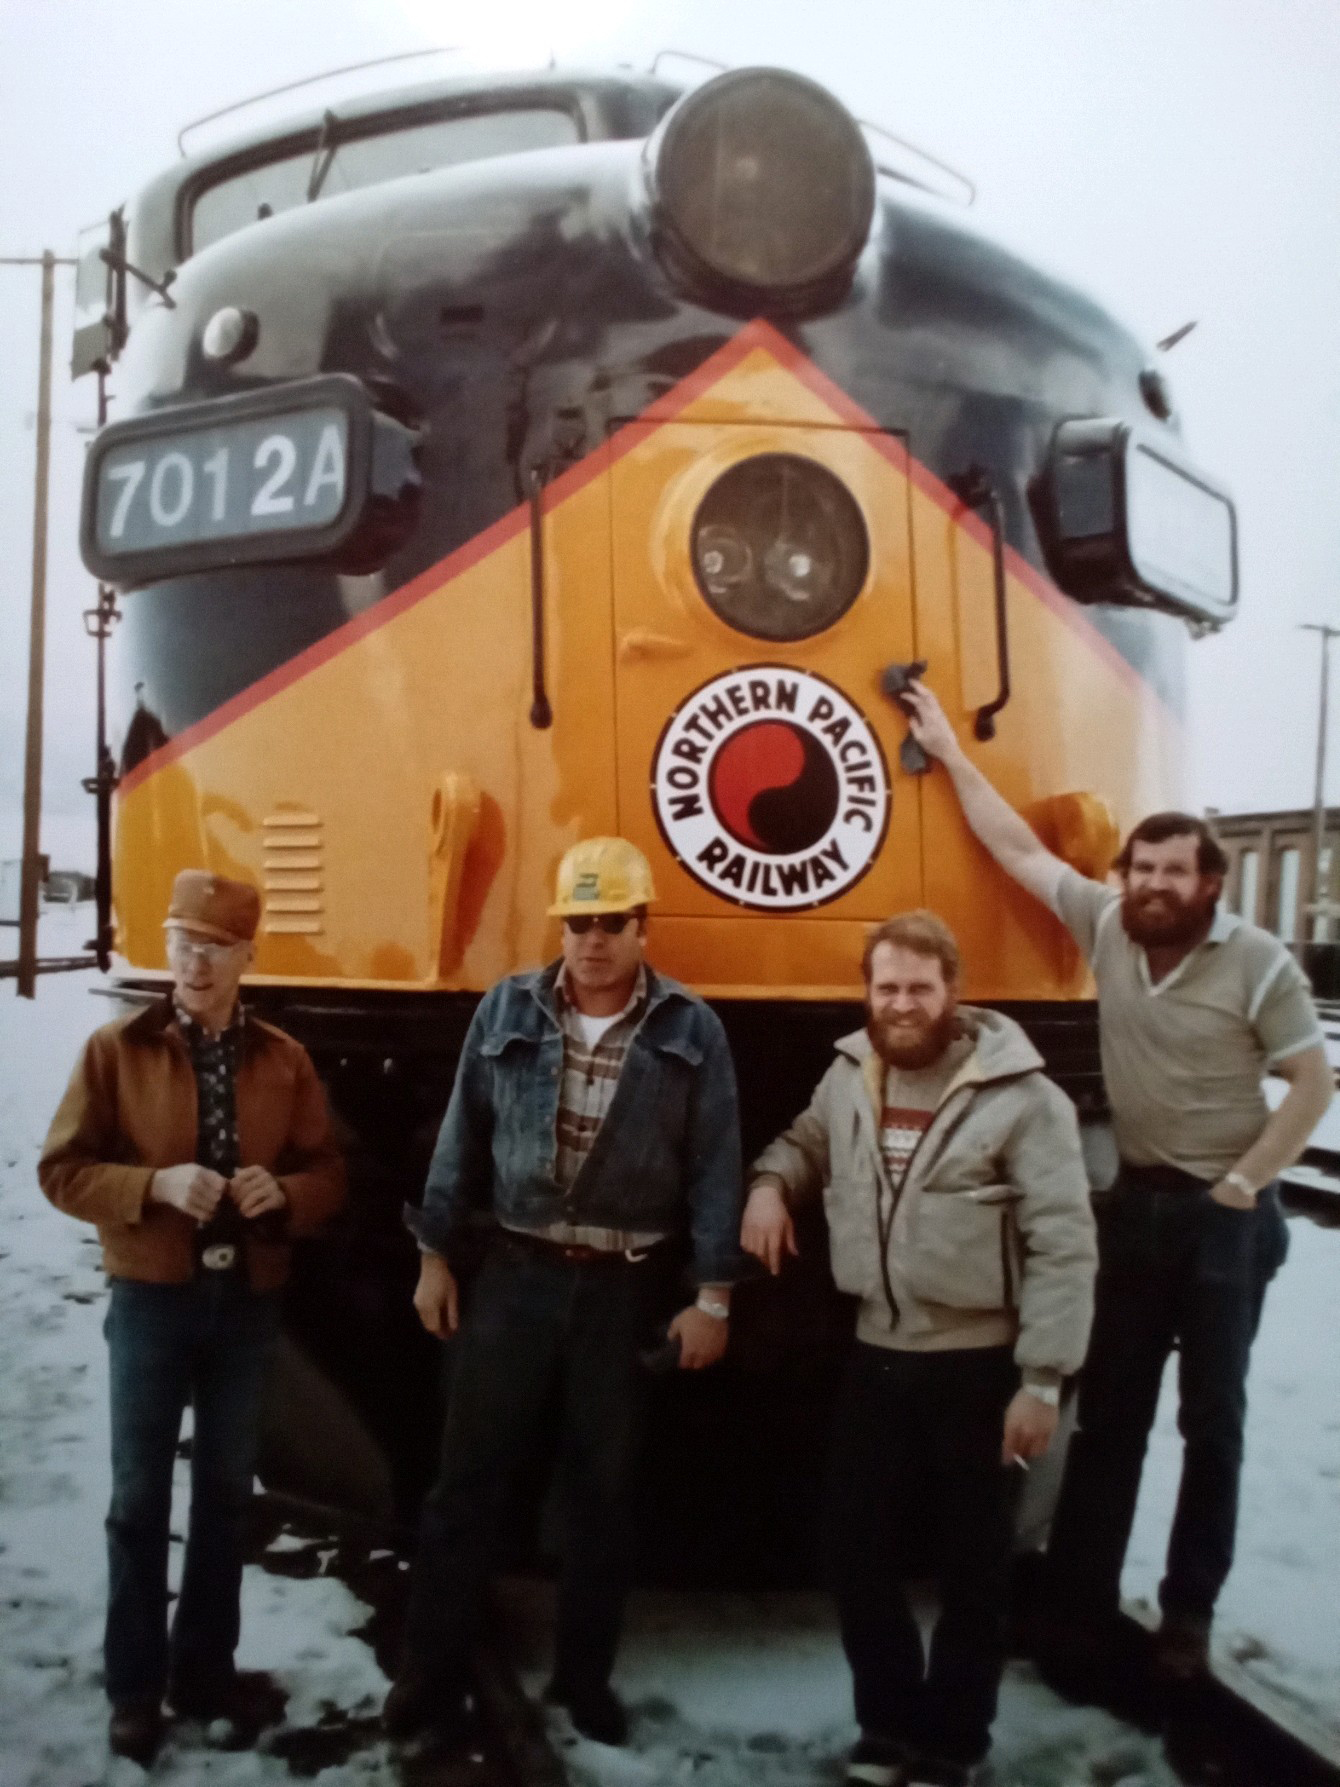 Bill Hampson, left, standing in front of a Northern Pacific Railway locomotive with three colleagues